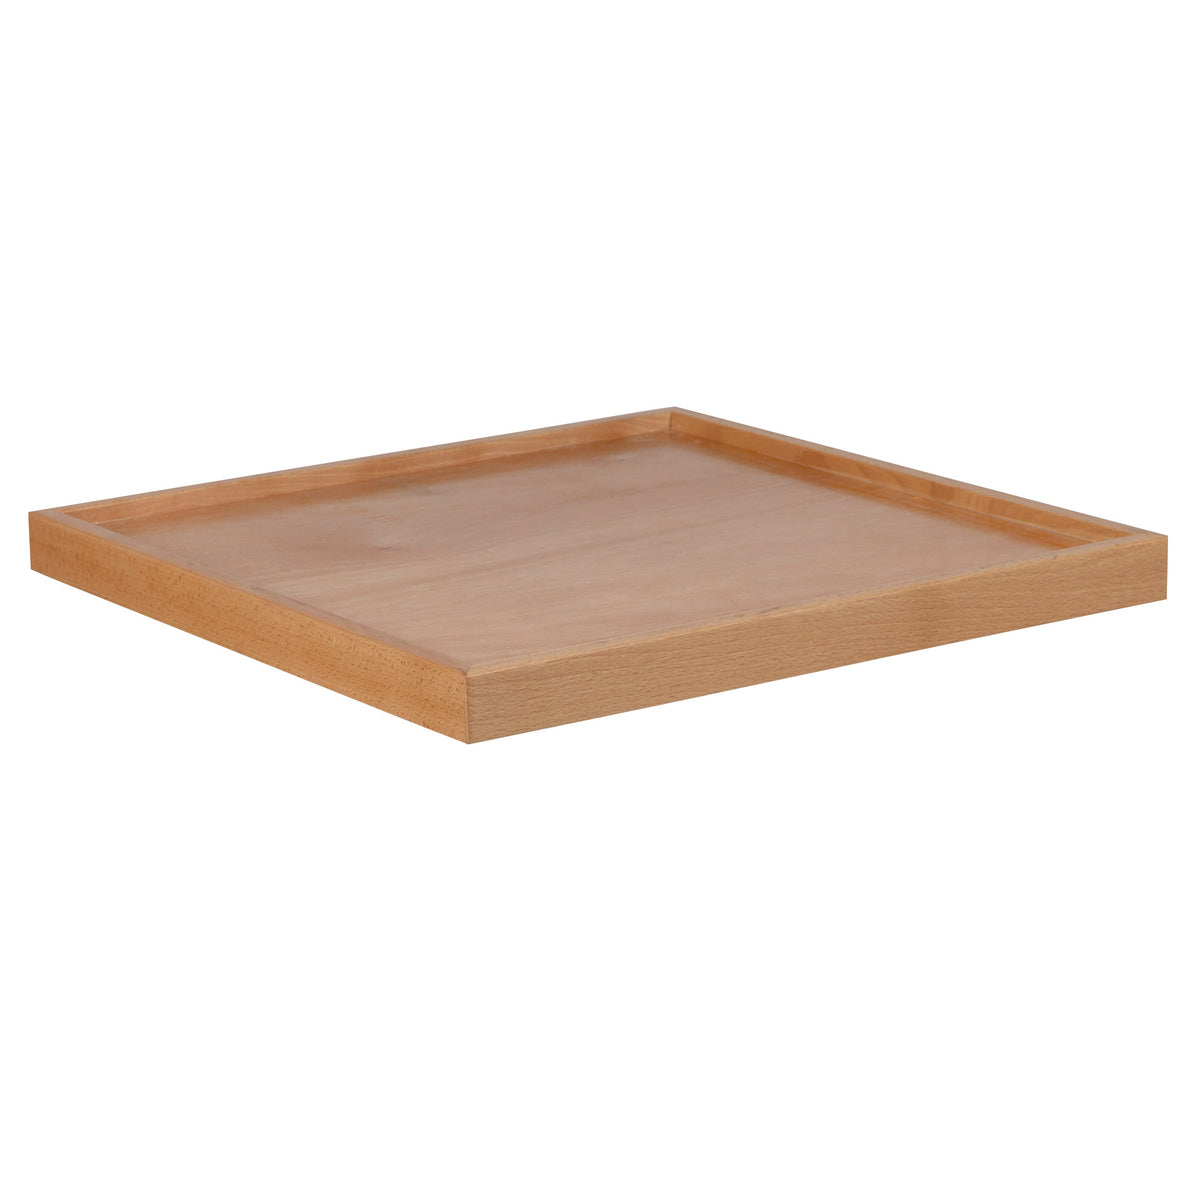 24" |#| 24" Square Butcher Block Style Table Top - Restaurant Table Top